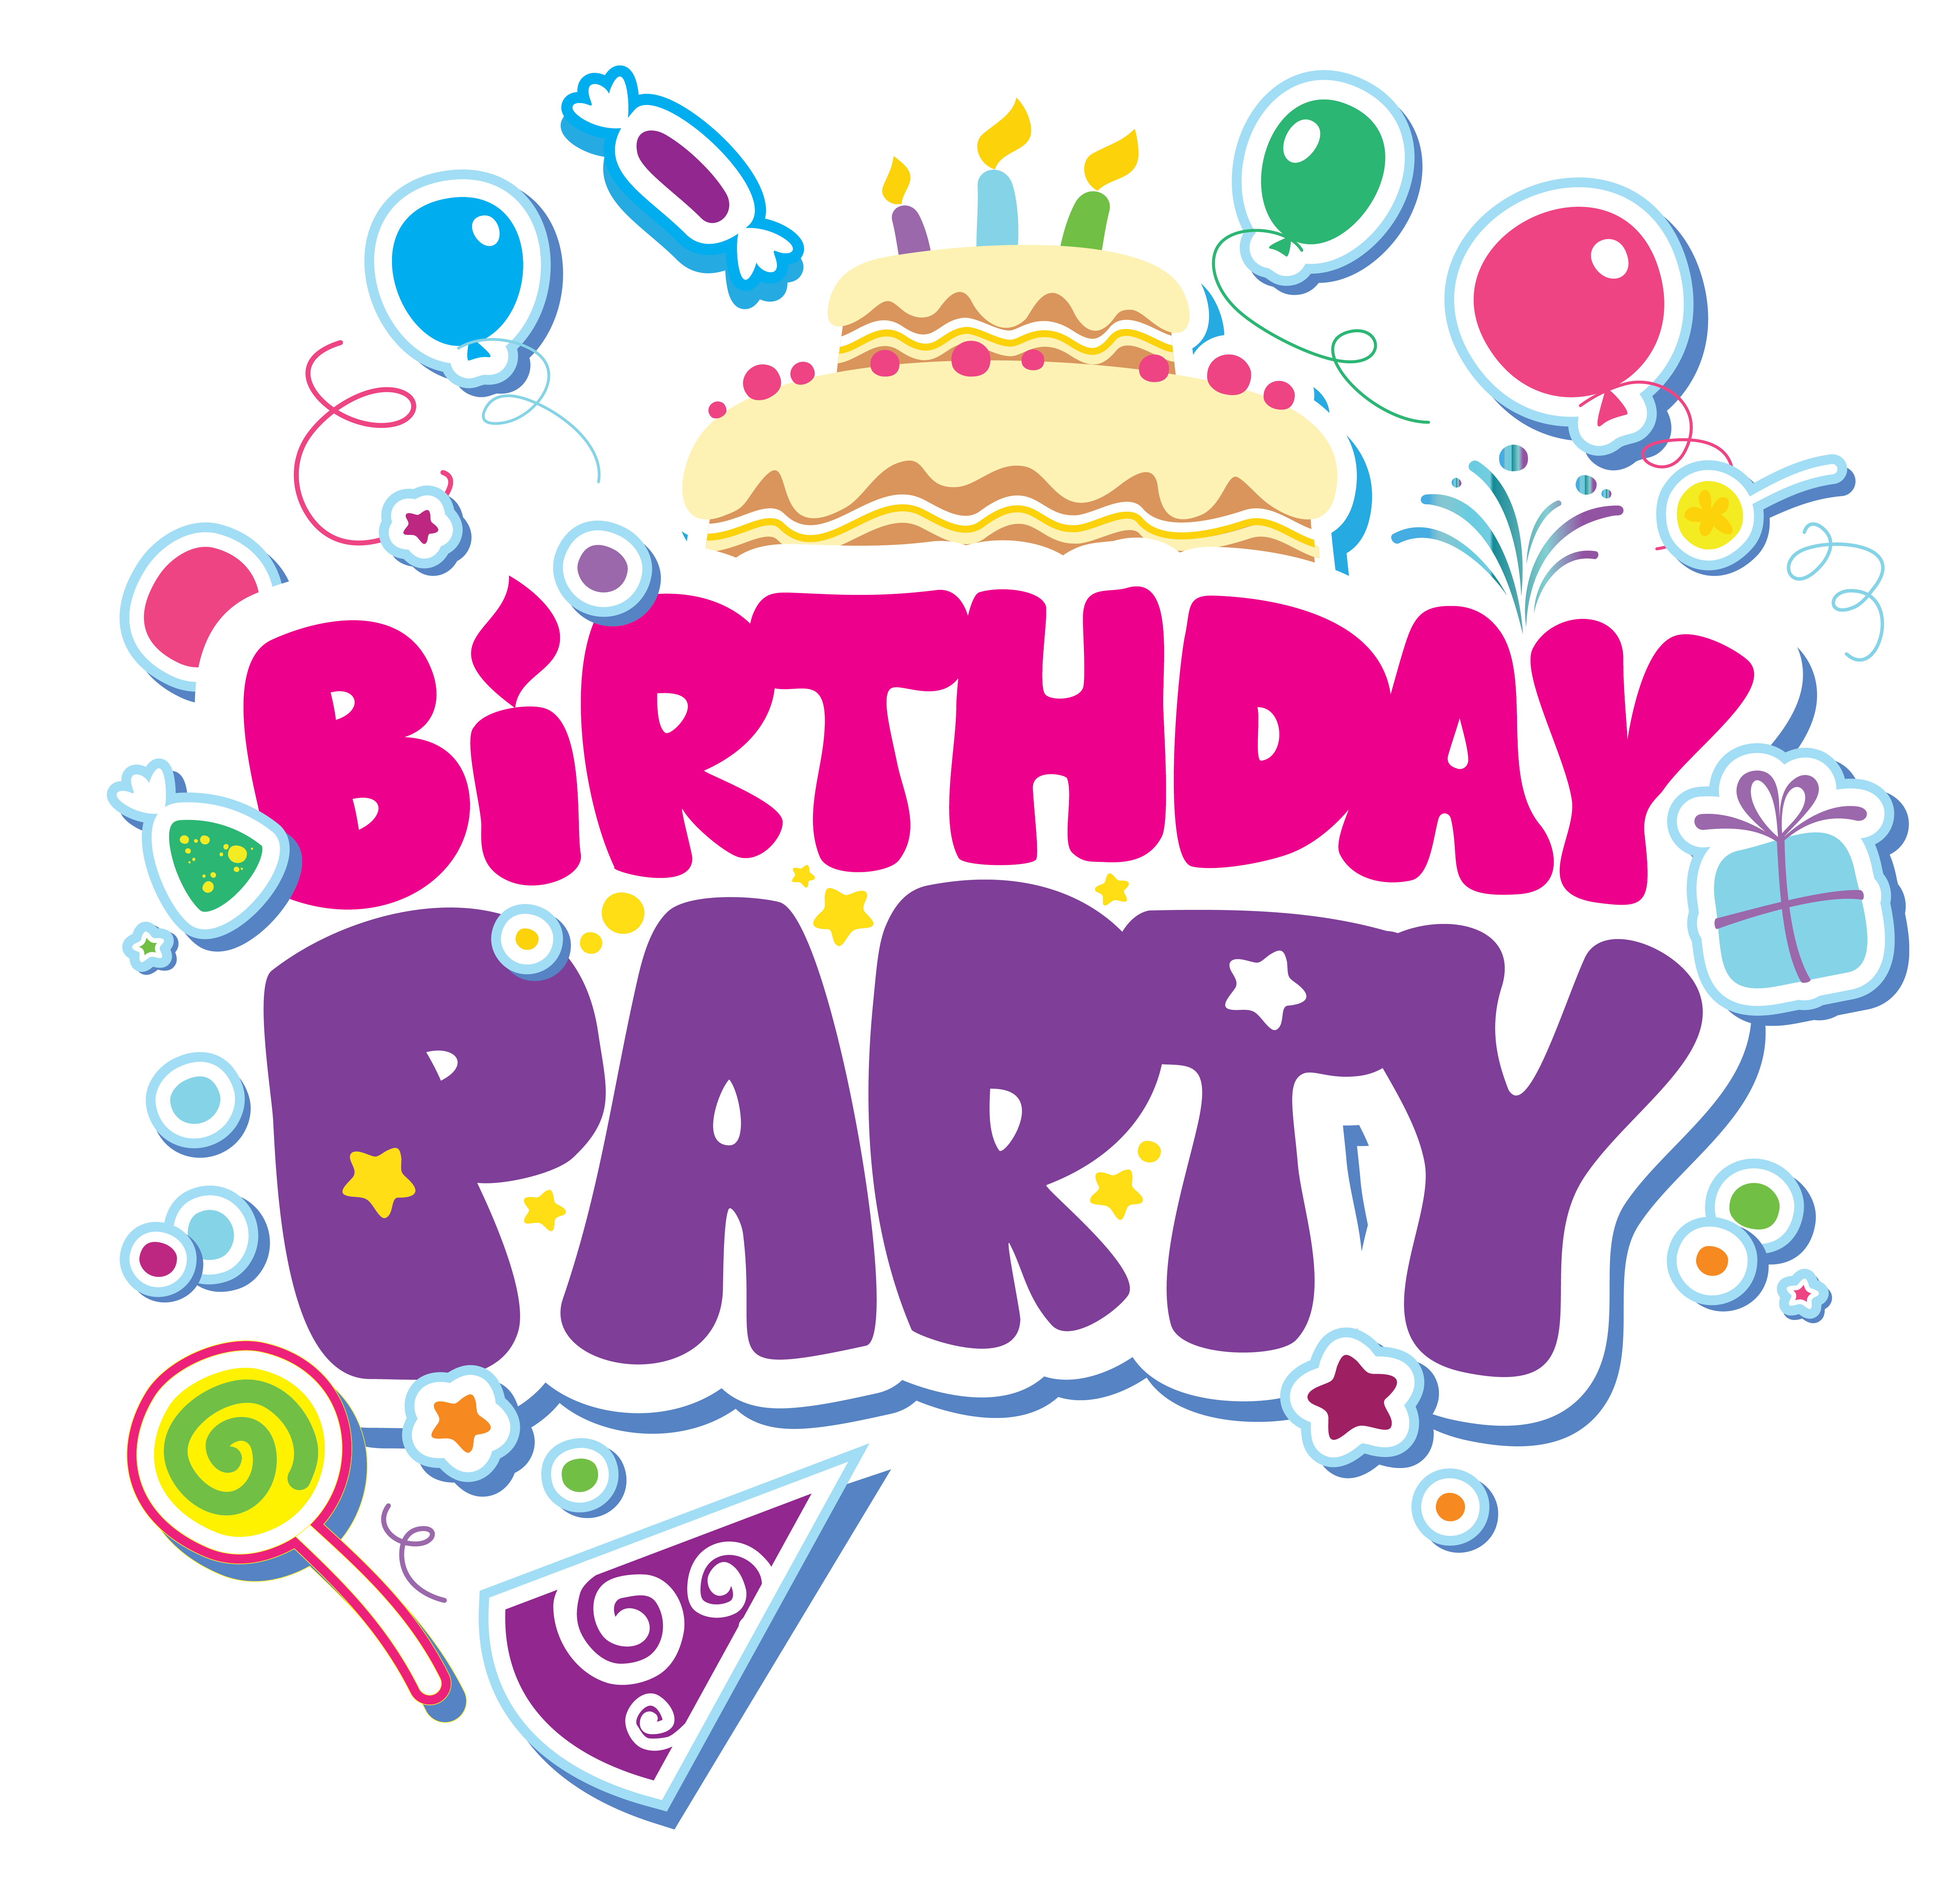 birthday party clip art free download - photo #14